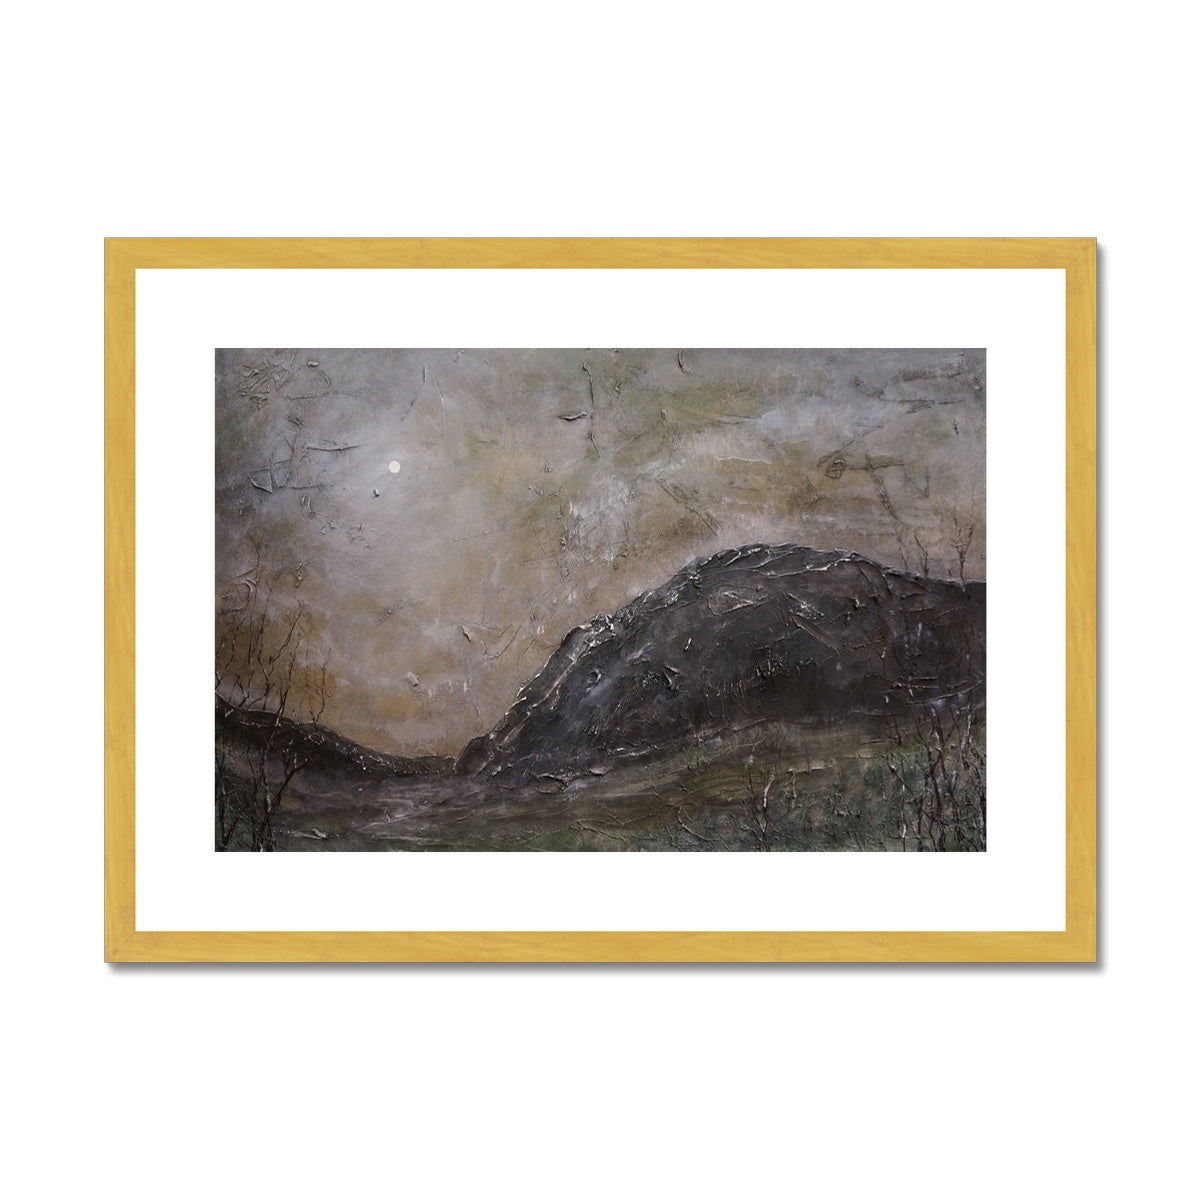 Glen Nevis Moonlight Painting | Antique Framed & Mounted Prints From Scotland-Antique Framed & Mounted Prints-Scottish Lochs & Mountains Art Gallery-A2 Landscape-Gold Frame-Paintings, Prints, Homeware, Art Gifts From Scotland By Scottish Artist Kevin Hunter